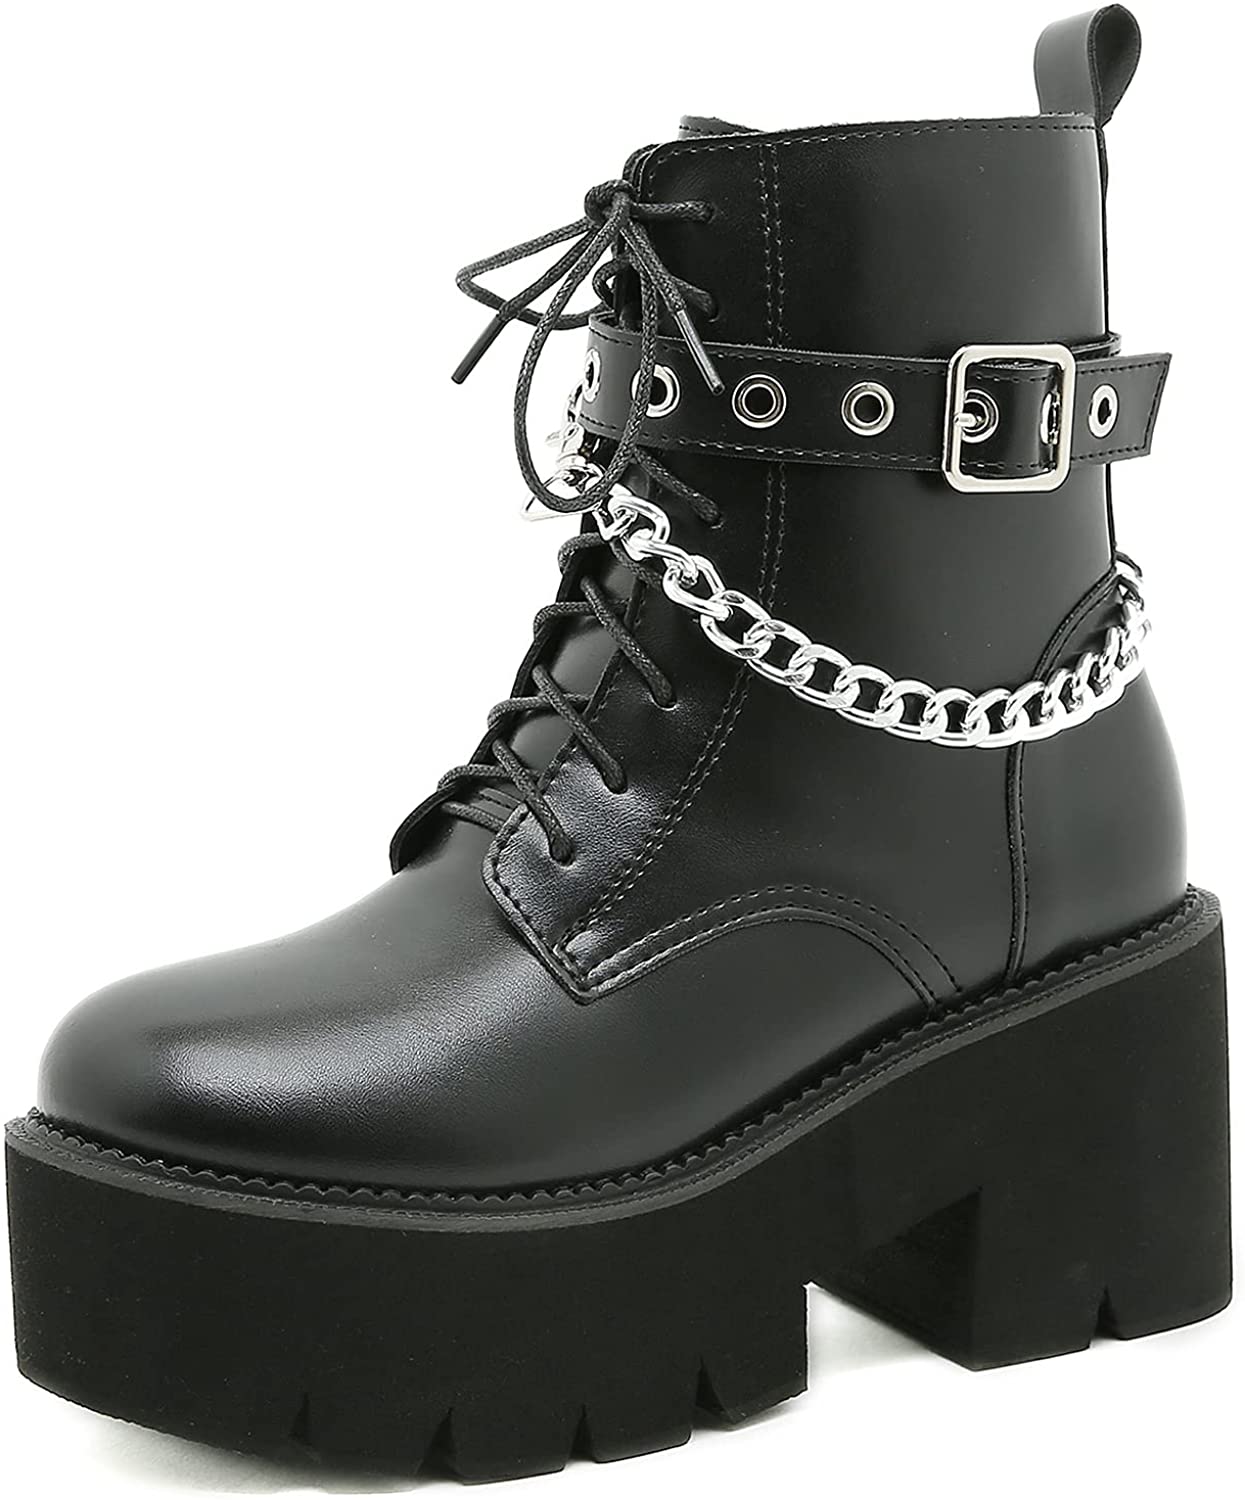 CYNLLIO Women's Lace-up Platform Boots Block High Heel Zip Gothic Mid Calf Boots with Bag Punk Motorcyle Boots Combat Boots 